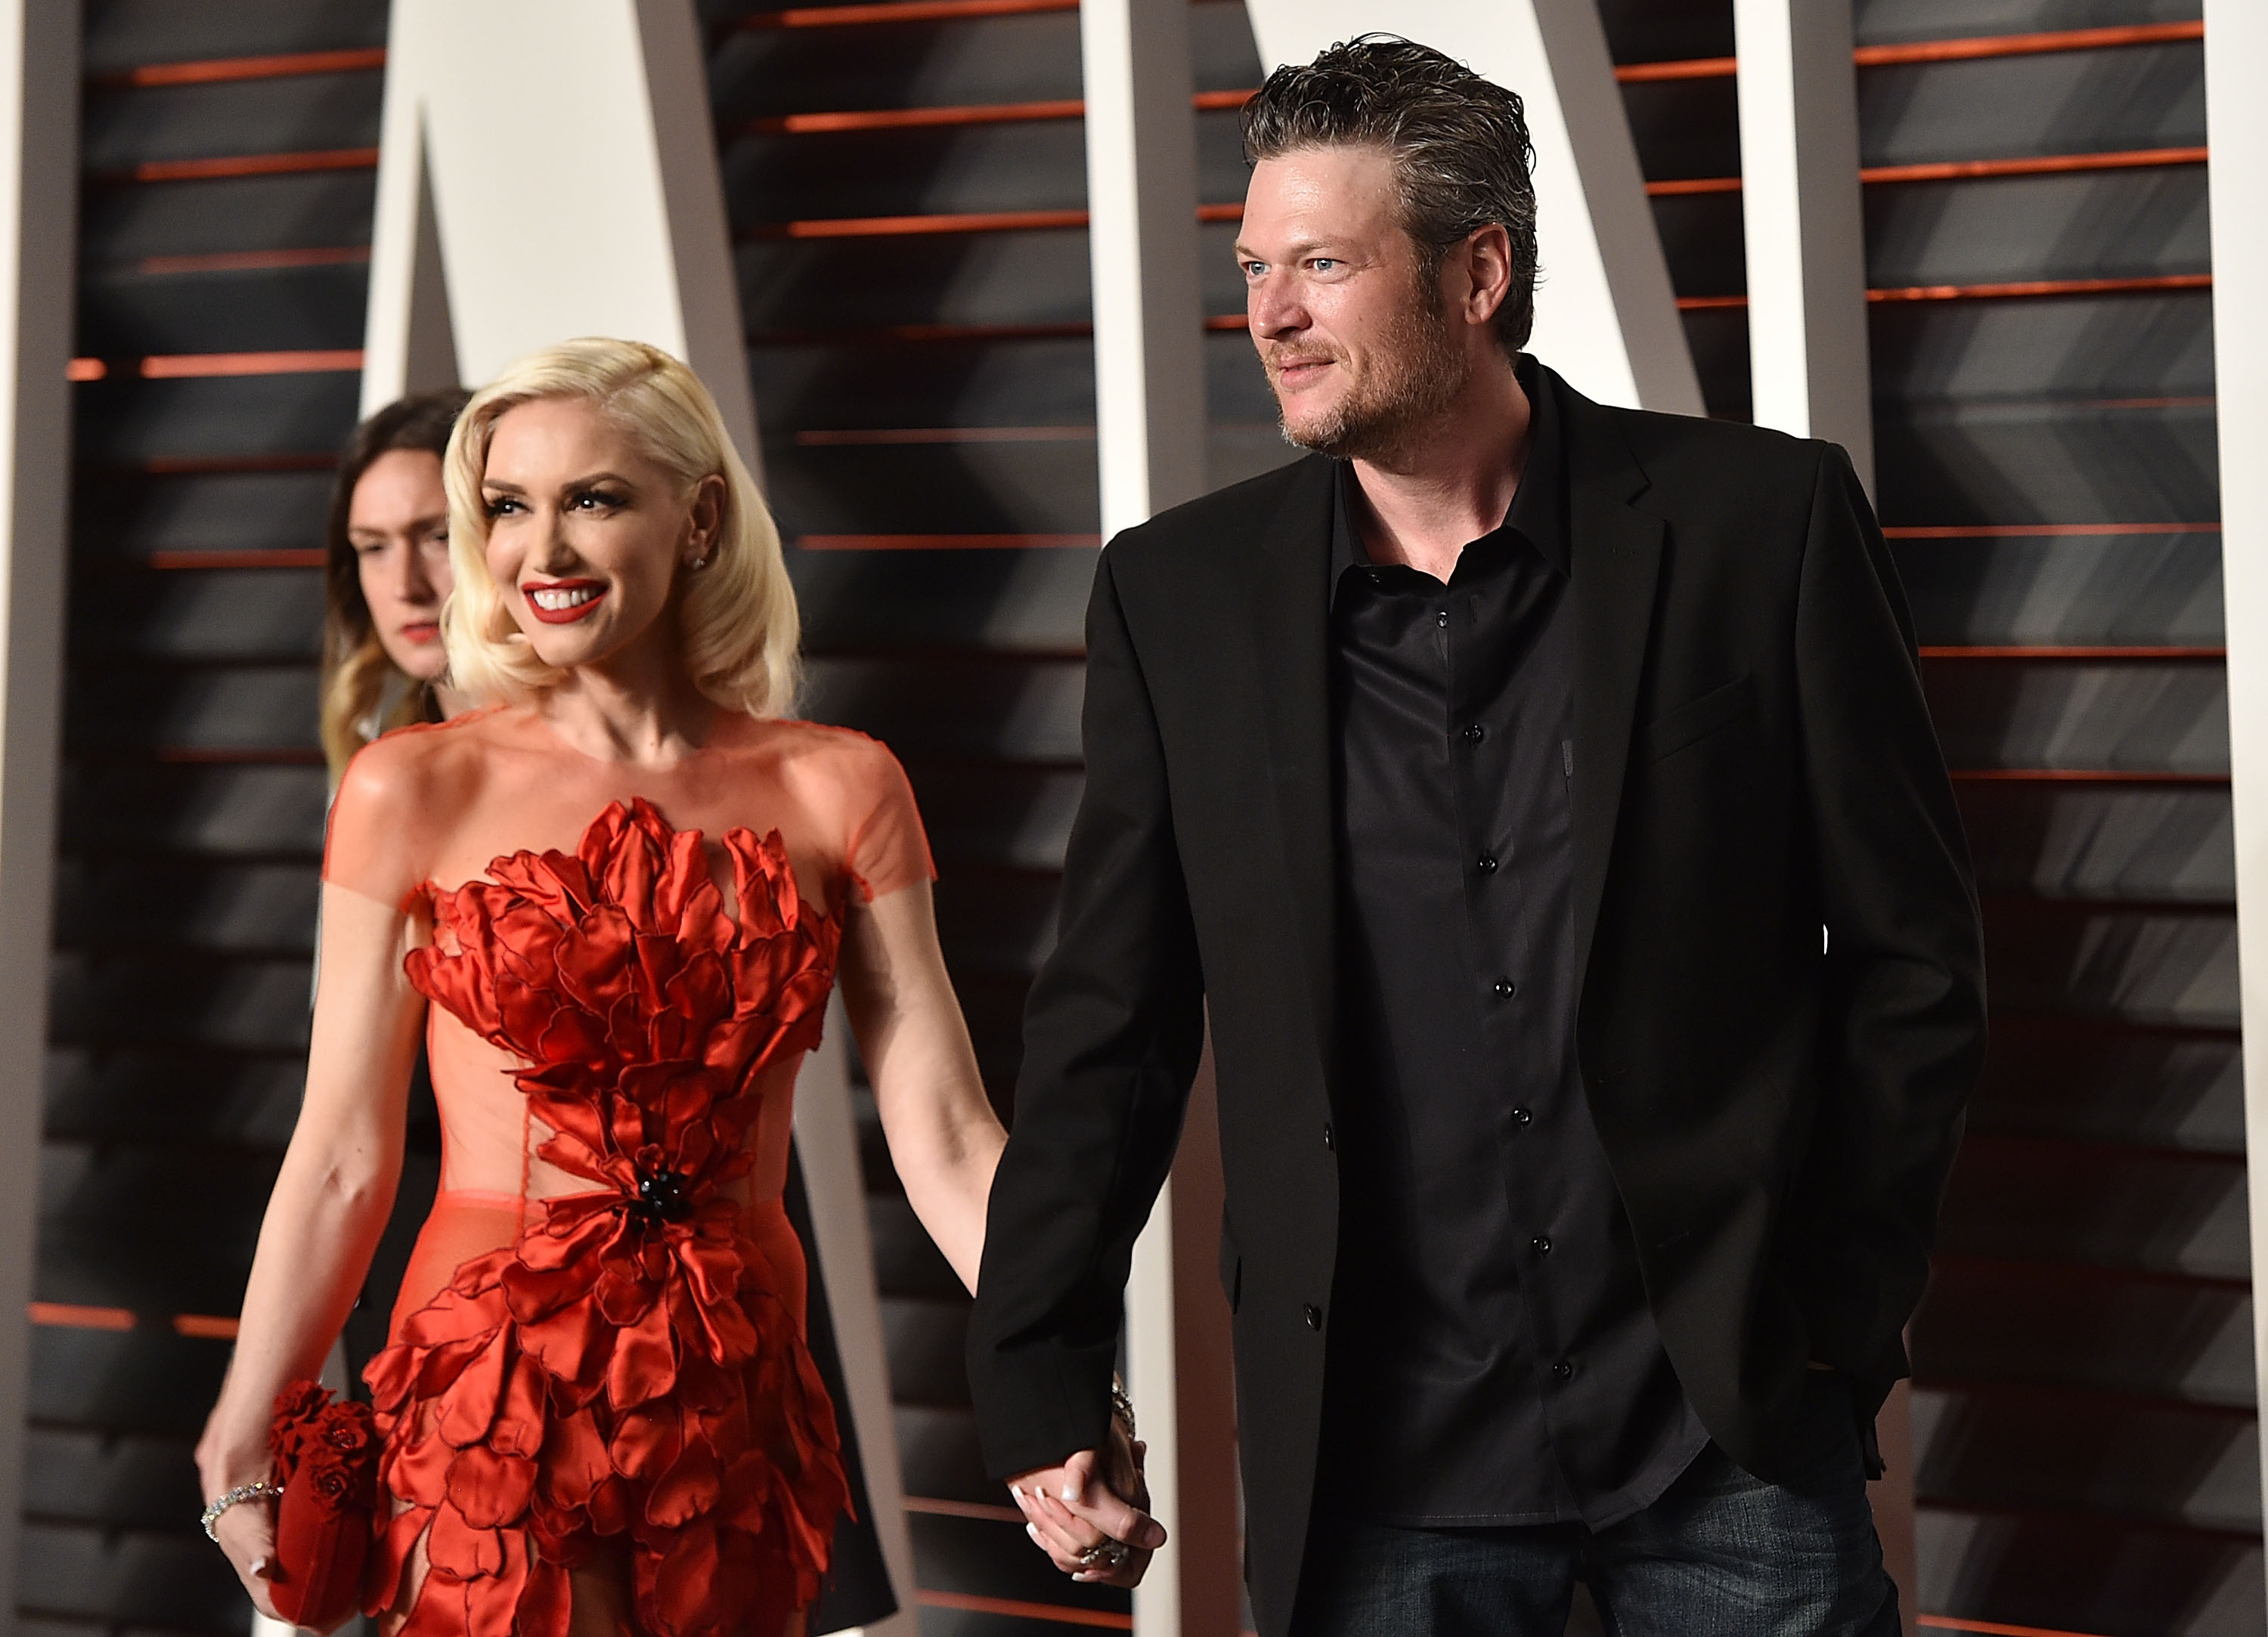 Gwen Stefani and Blake Shelton's Relationship Timeline as They Release Duet